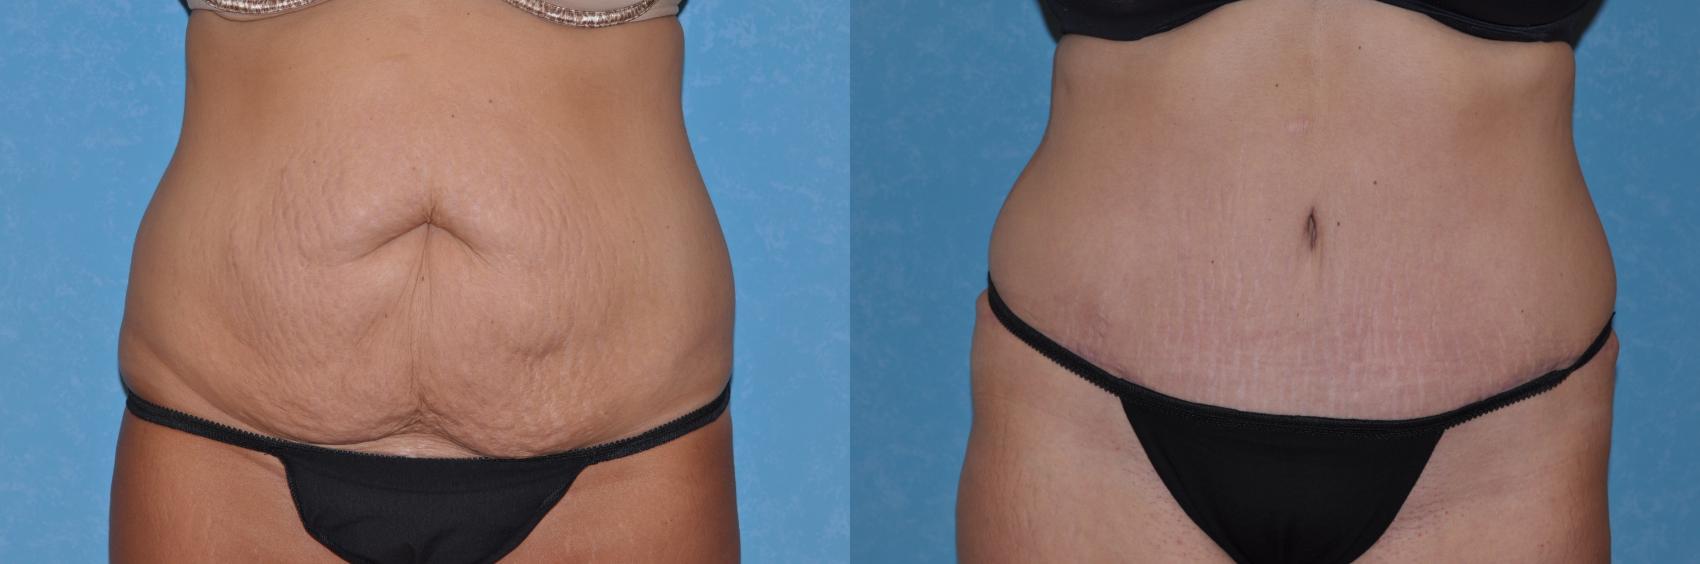 How Much Does a Tummy Tuck Cost? – Craig W. Colville MD, FACS